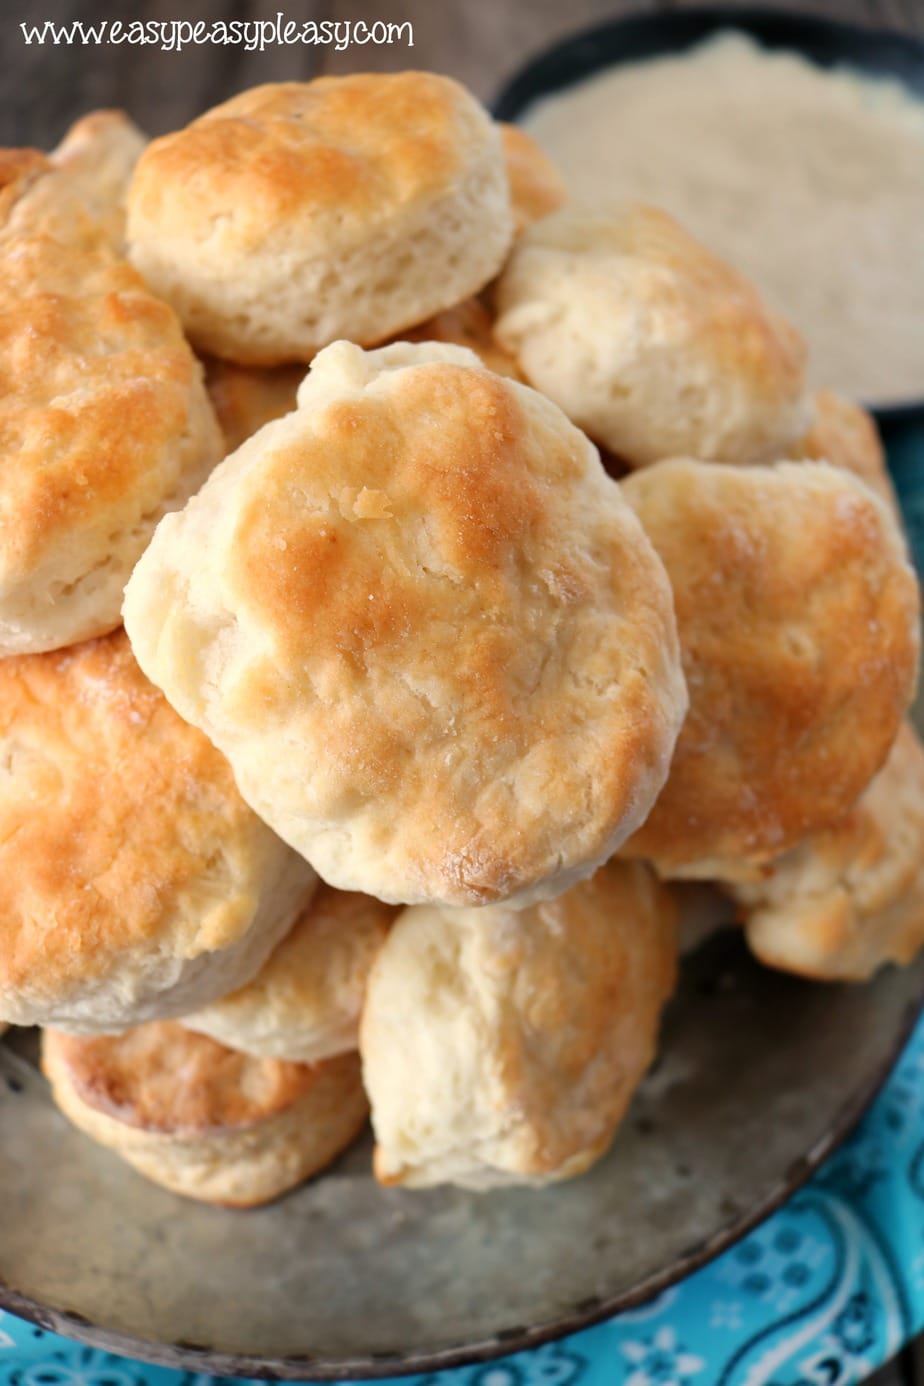 I finally nailed the perfect homemade biscuit with hands on help from Pops. You'll never make hockey pucks again. This recipe uses only uses 4 ingredients and they turn out delicious every time.